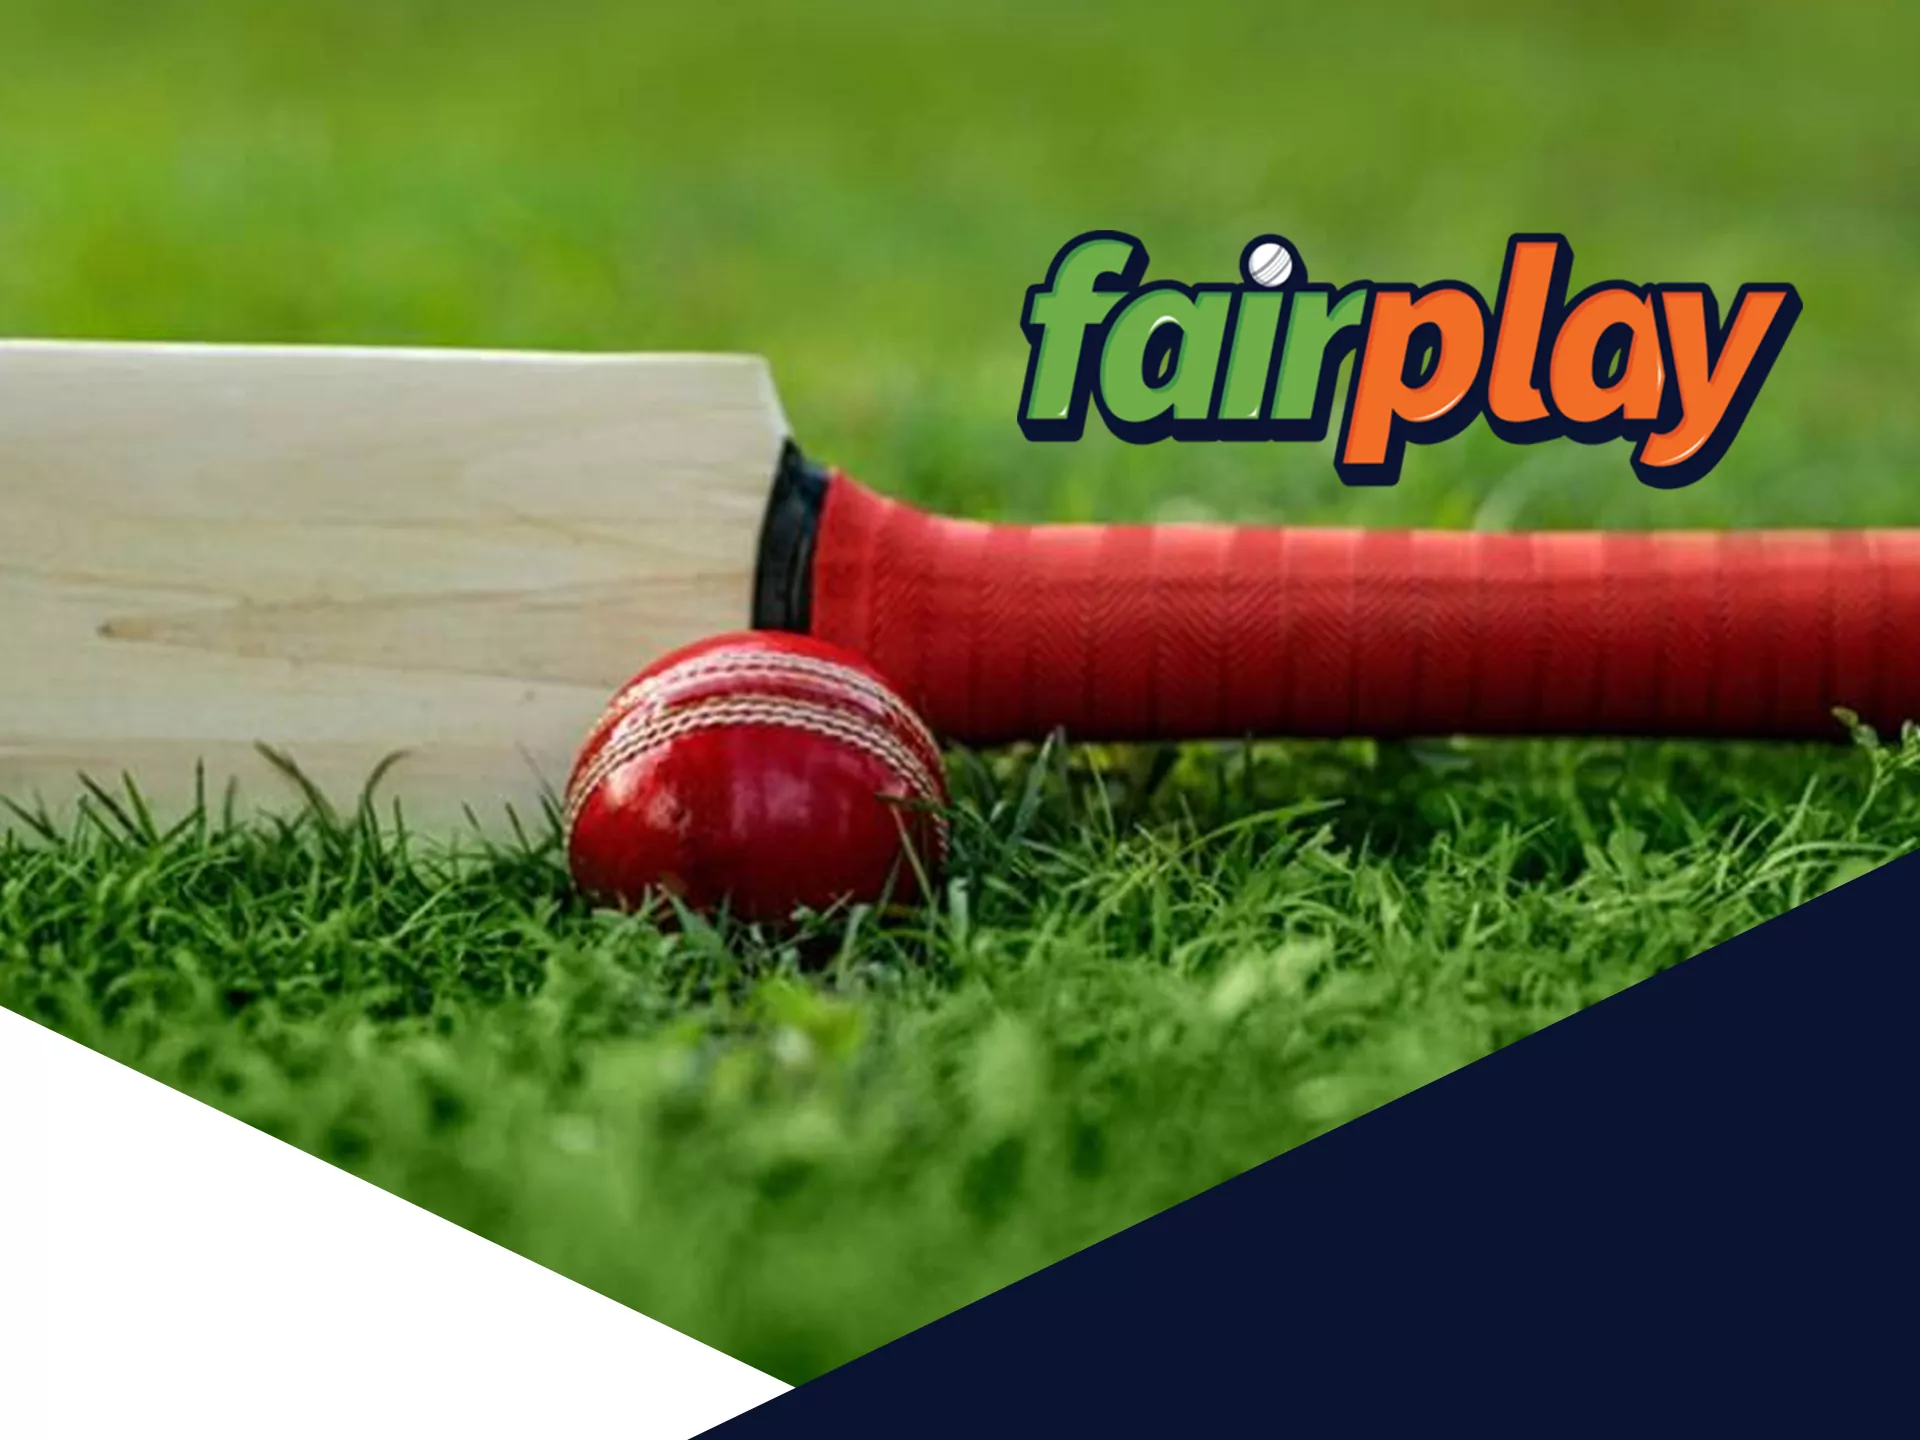 Bet on cricket matches in Fairplay app.